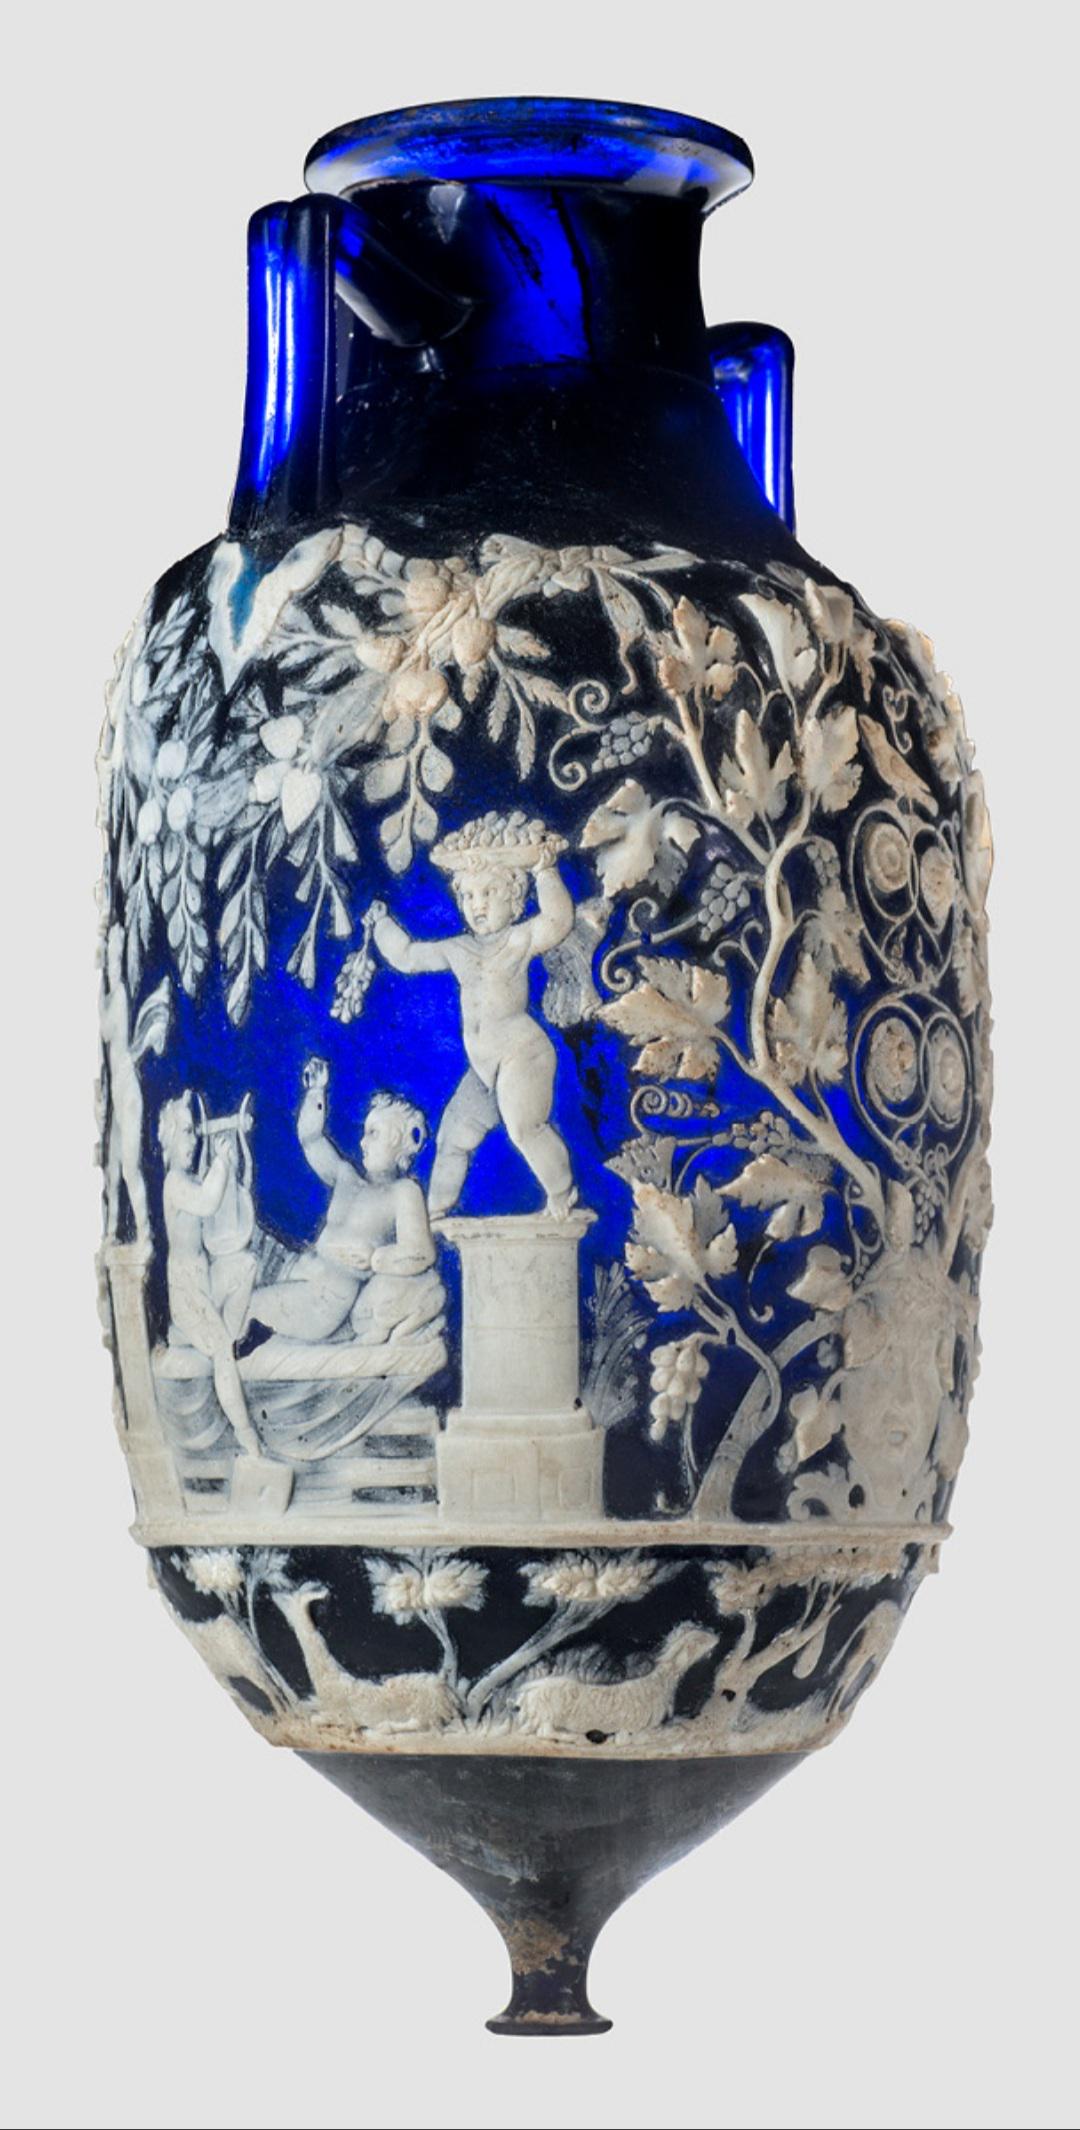 A cameo glass amphora decorated with scenes of Cupids harvesting grapes. Ca. 1st Century CE, from the Tomb of the Blue Vase in Pompeii, now housed at the National Archaeological Museum of Naples.jpeg